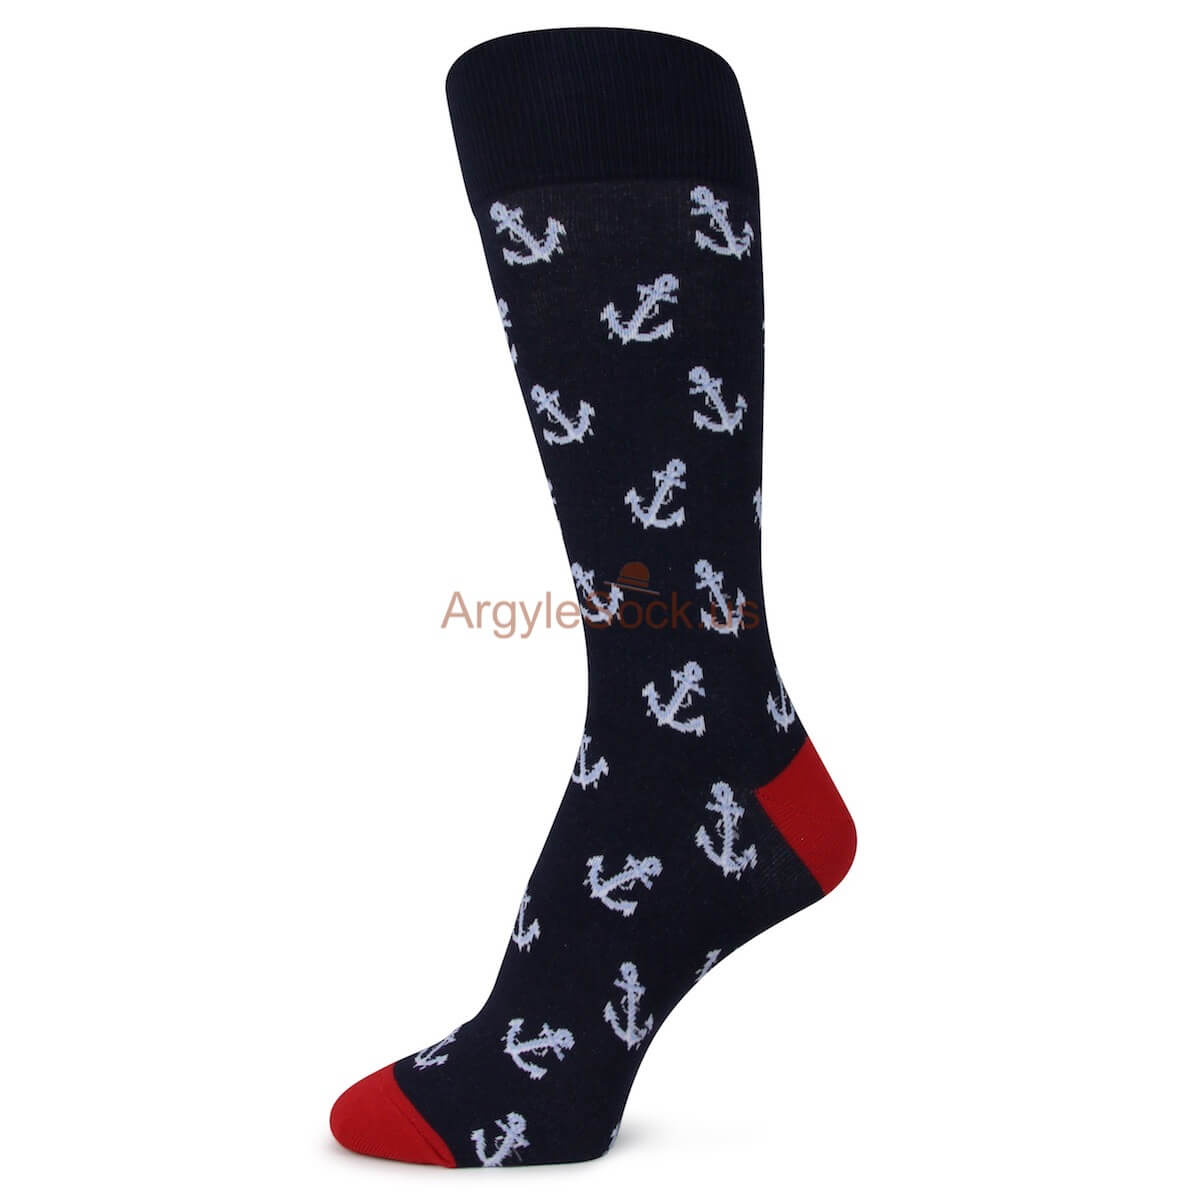 Black with Red Heels and Anchor Themed Socks for Men